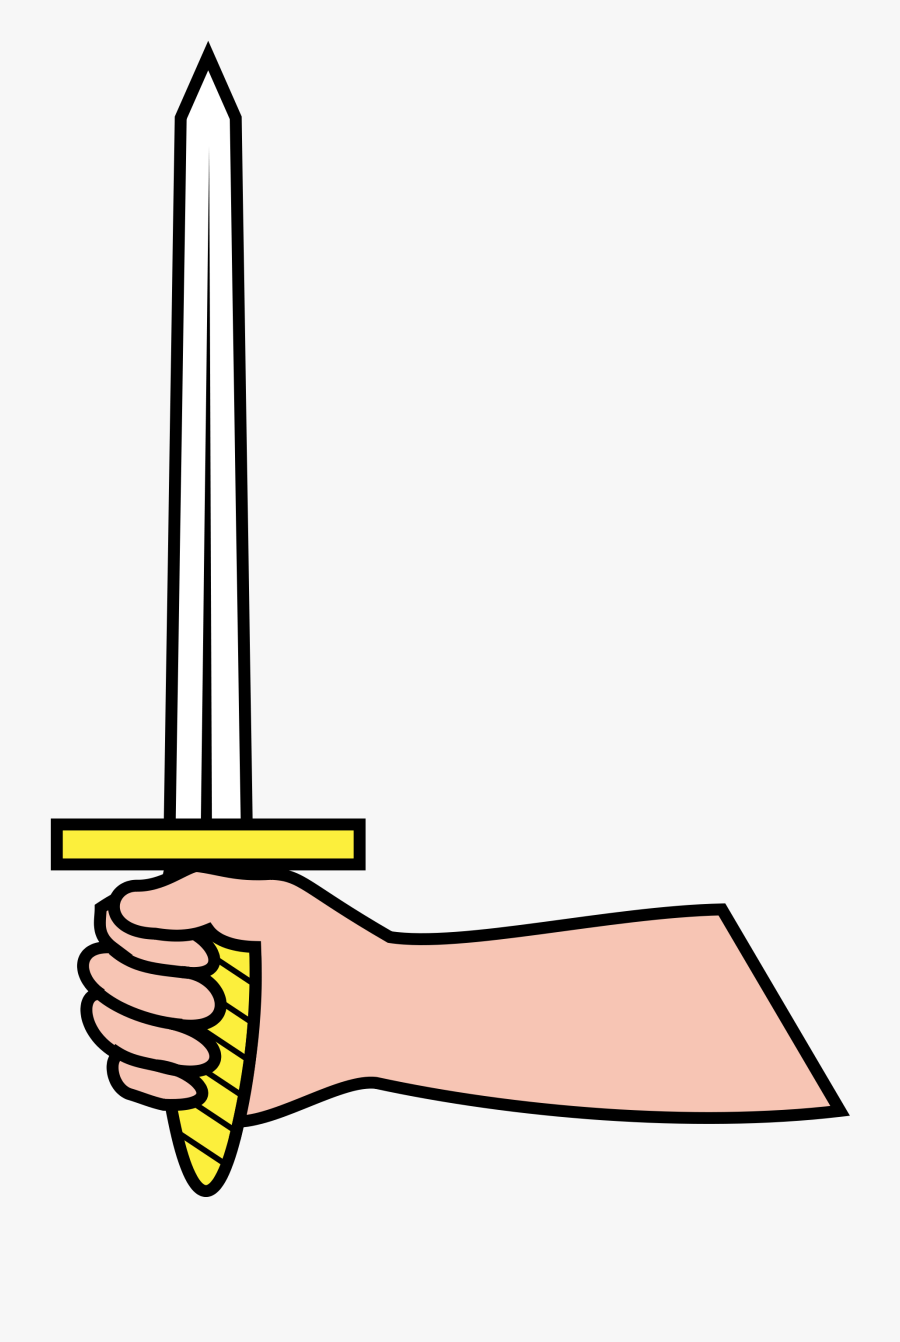 Sword Holding Clipart - Heraldic Hand With Sword, Transparent Clipart